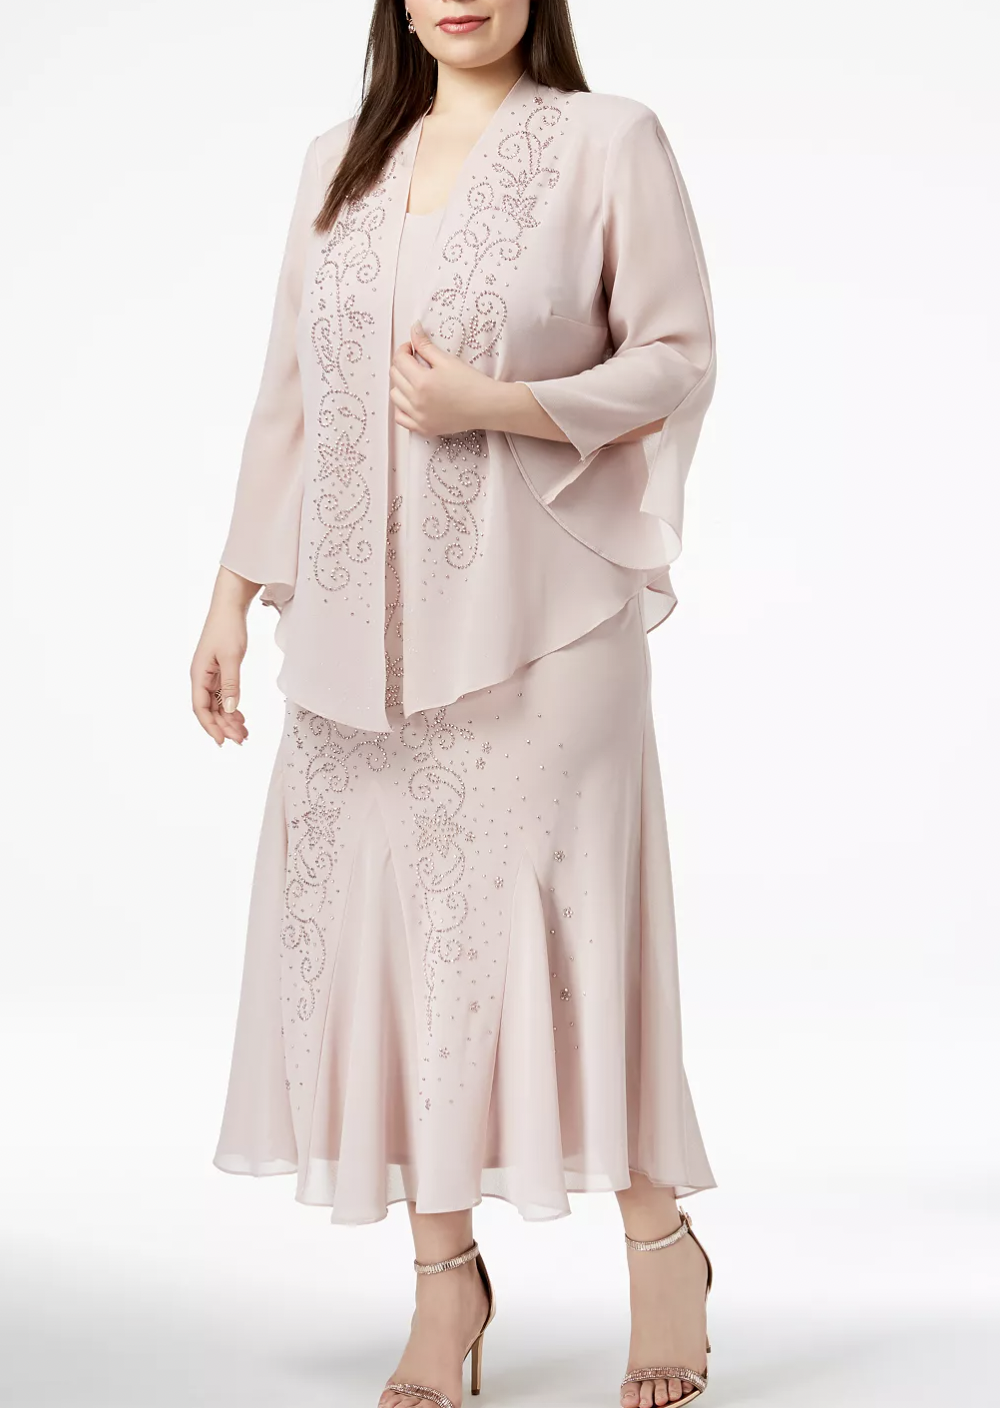 plus-size beaded dress and jacket ensemble by R&M Richards